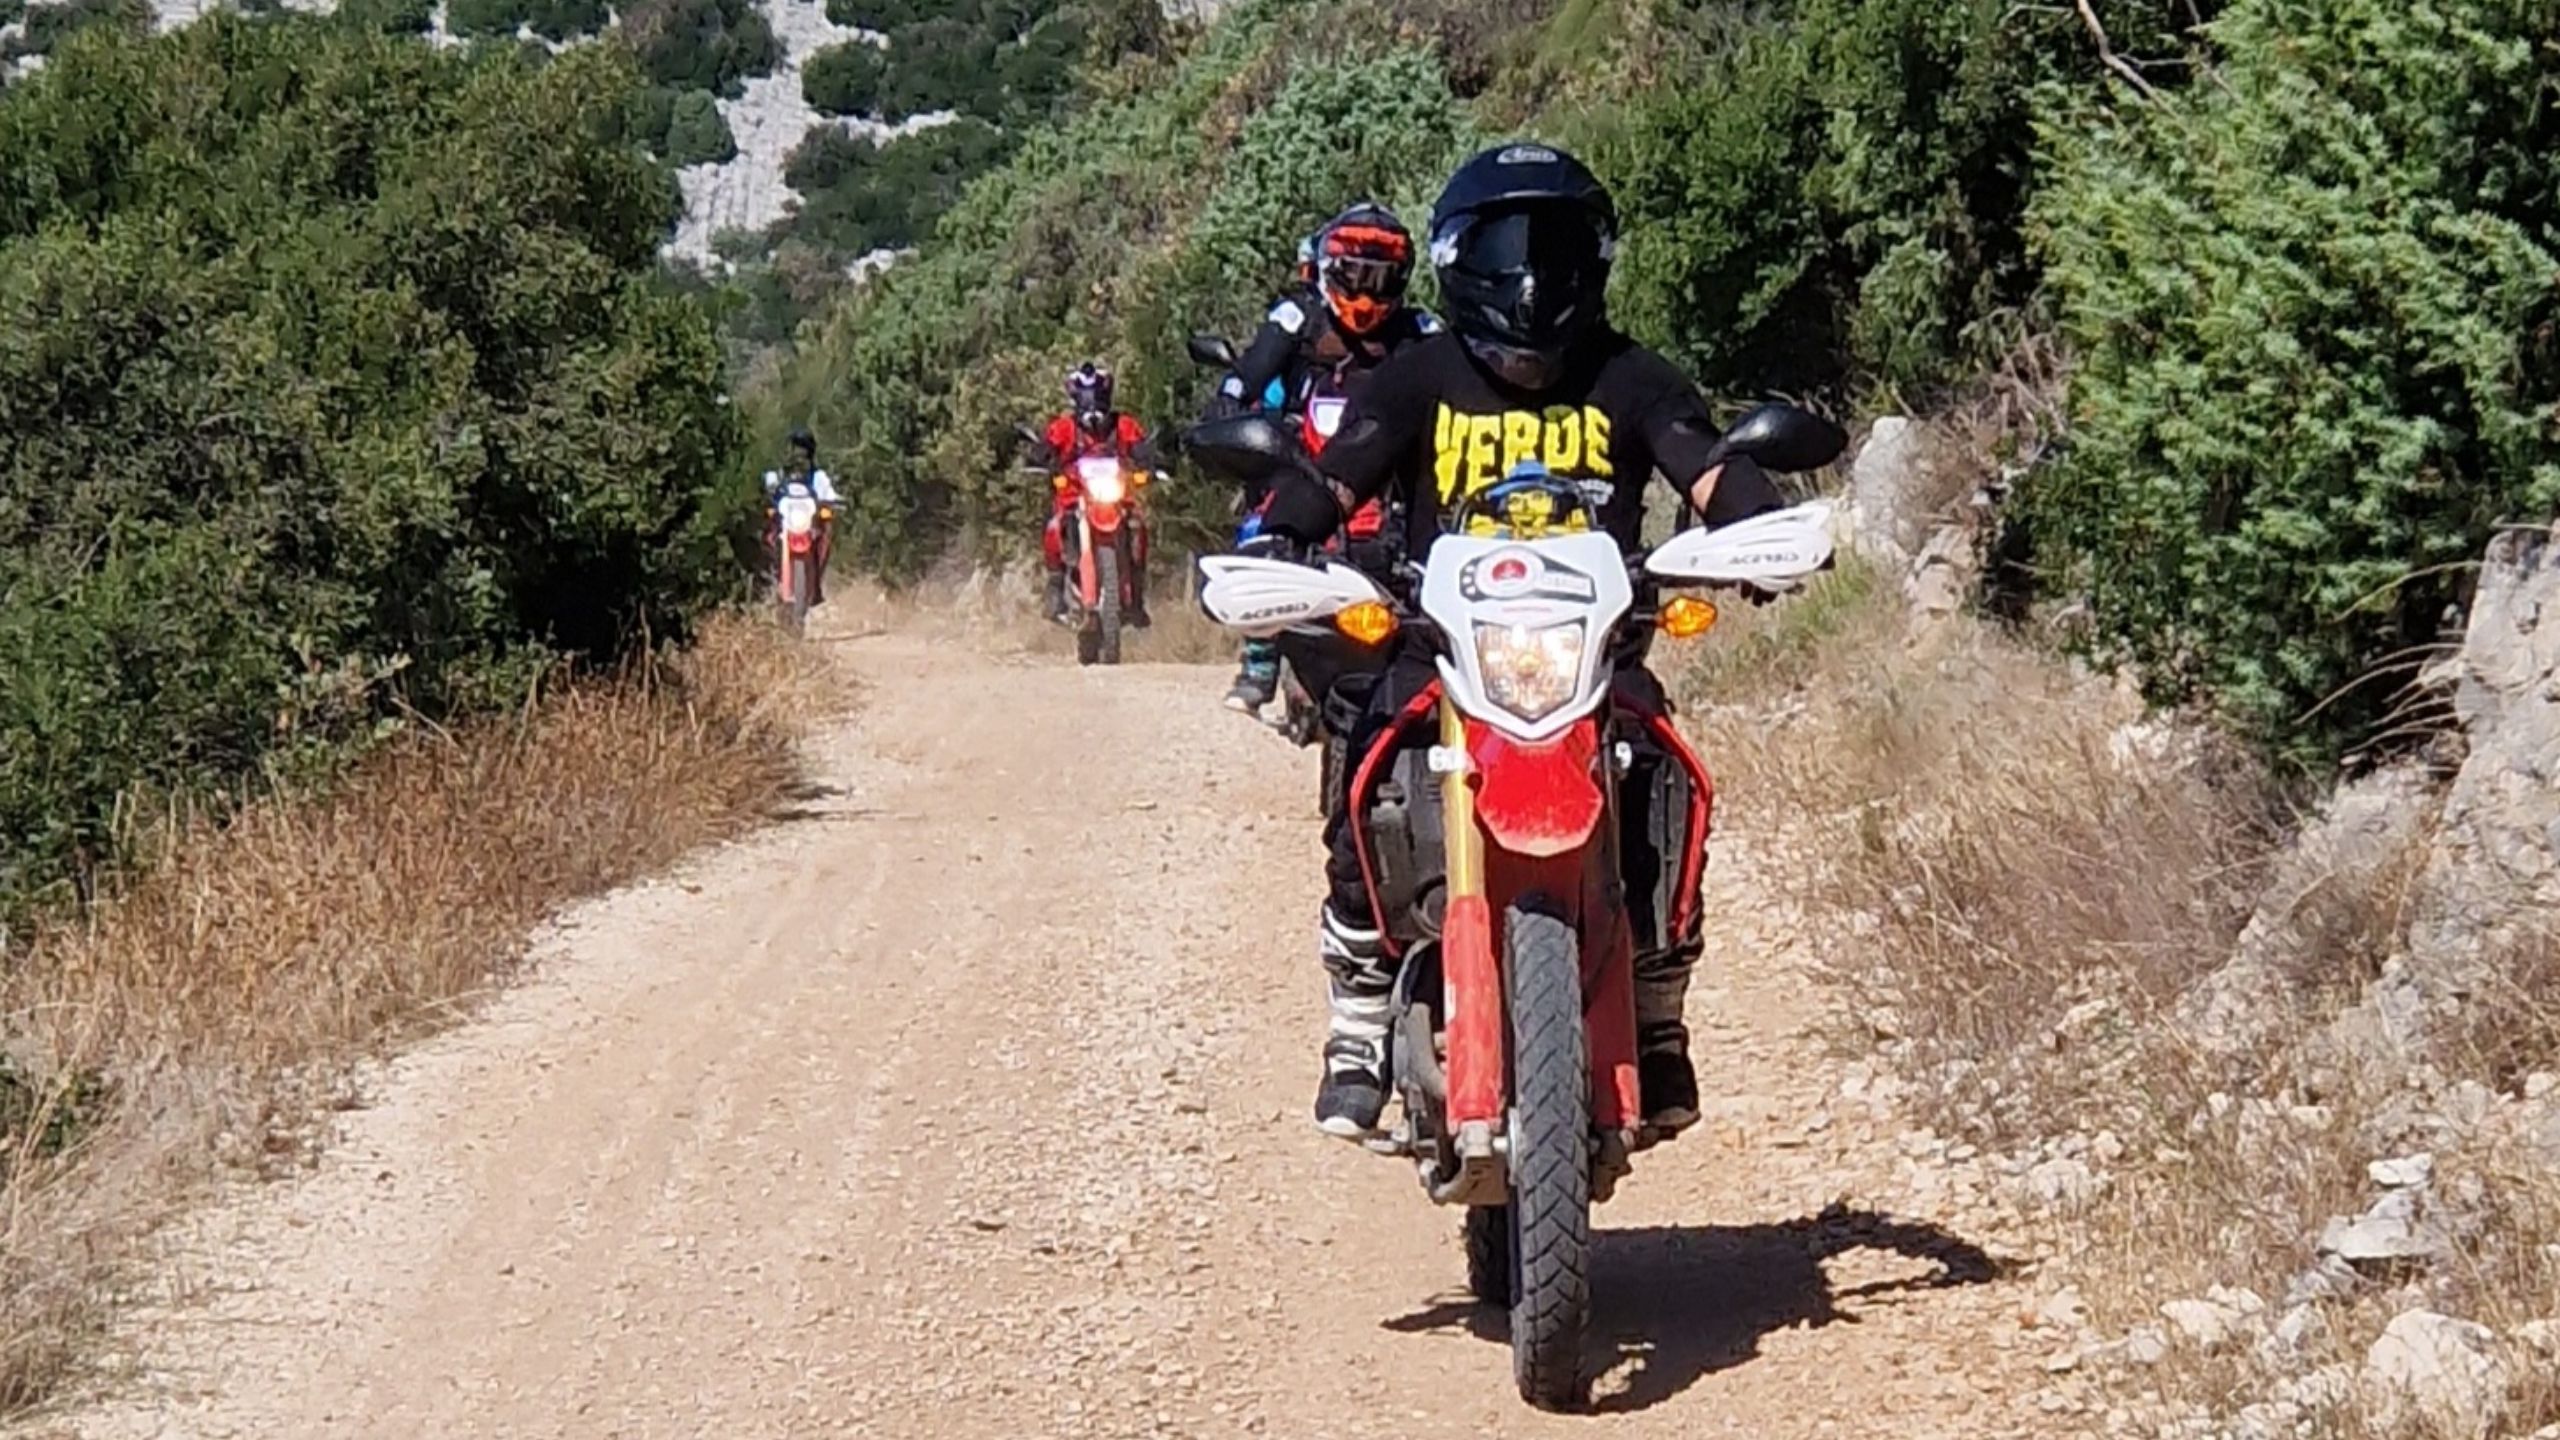 Funmoto ADVentures sightseeing 4 day only womens motorcycle tour in Croatia guests on tour